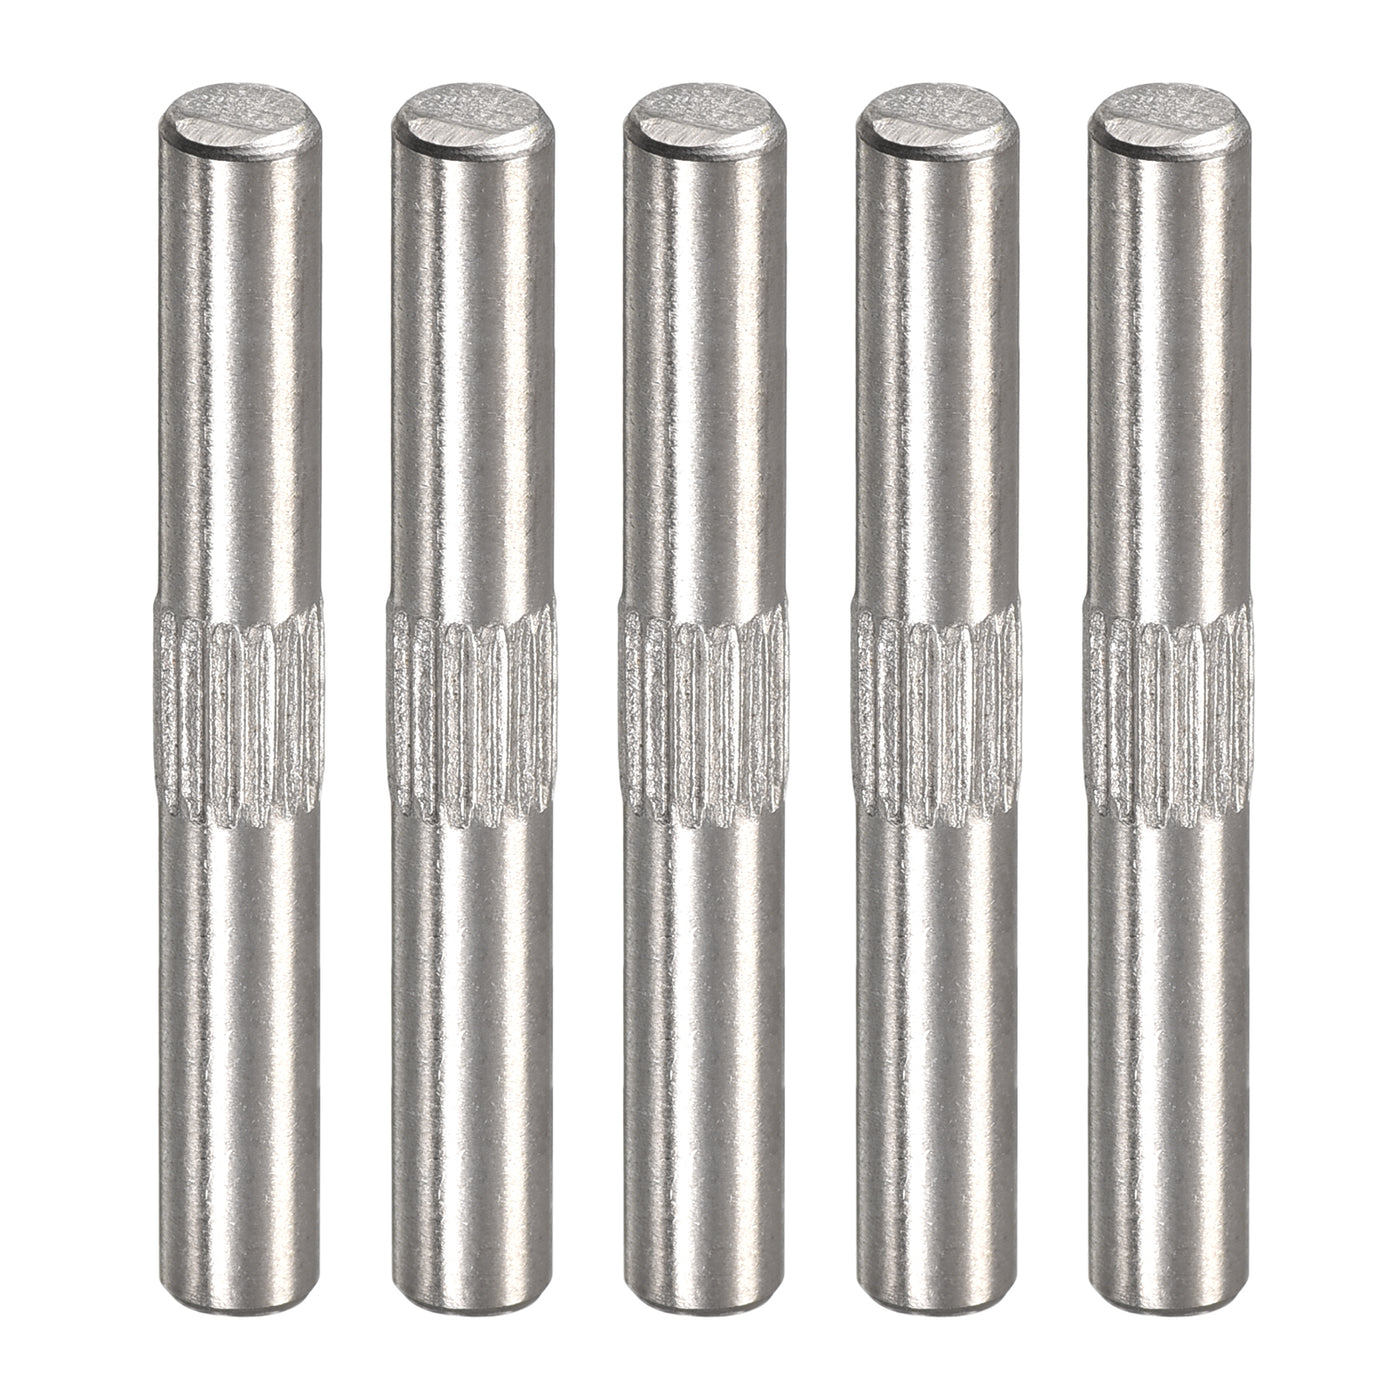 uxcell Uxcell 4x35mm 304 Stainless Steel Dowel Pins, 5Pcs Center Knurled Chamfered End Pin